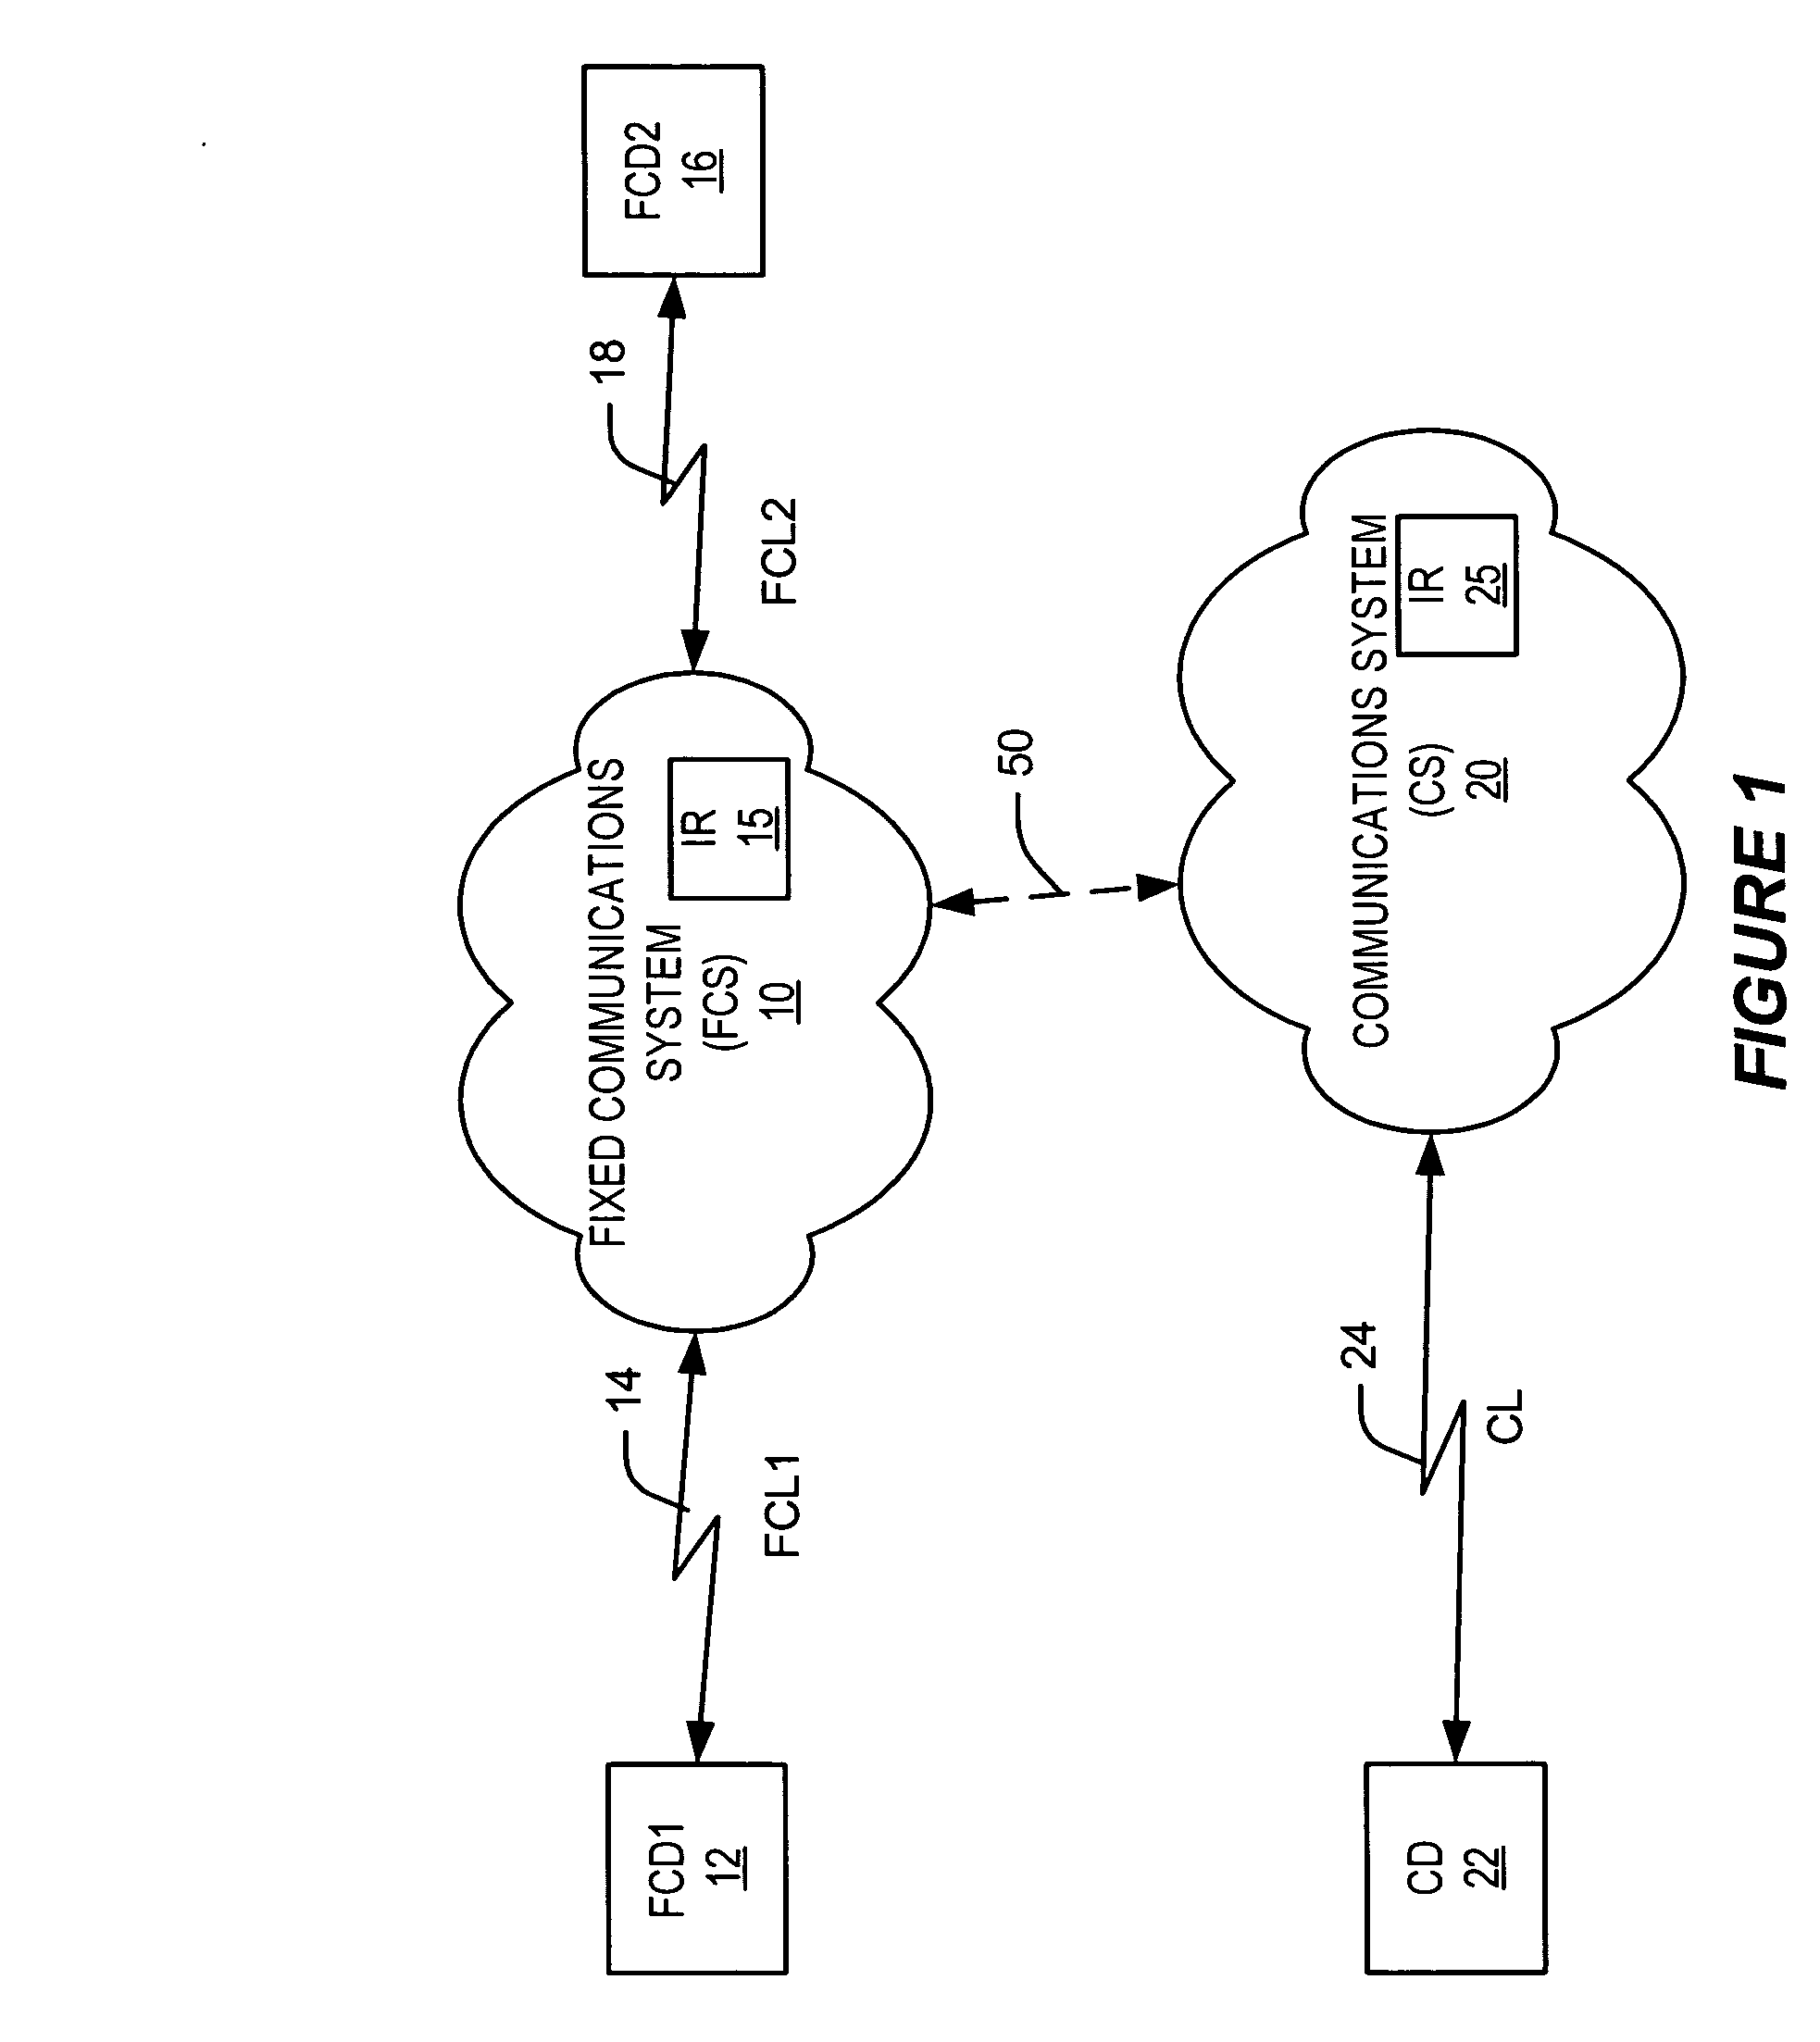 Reusing frequencies of a fixed and/or mobile communications system